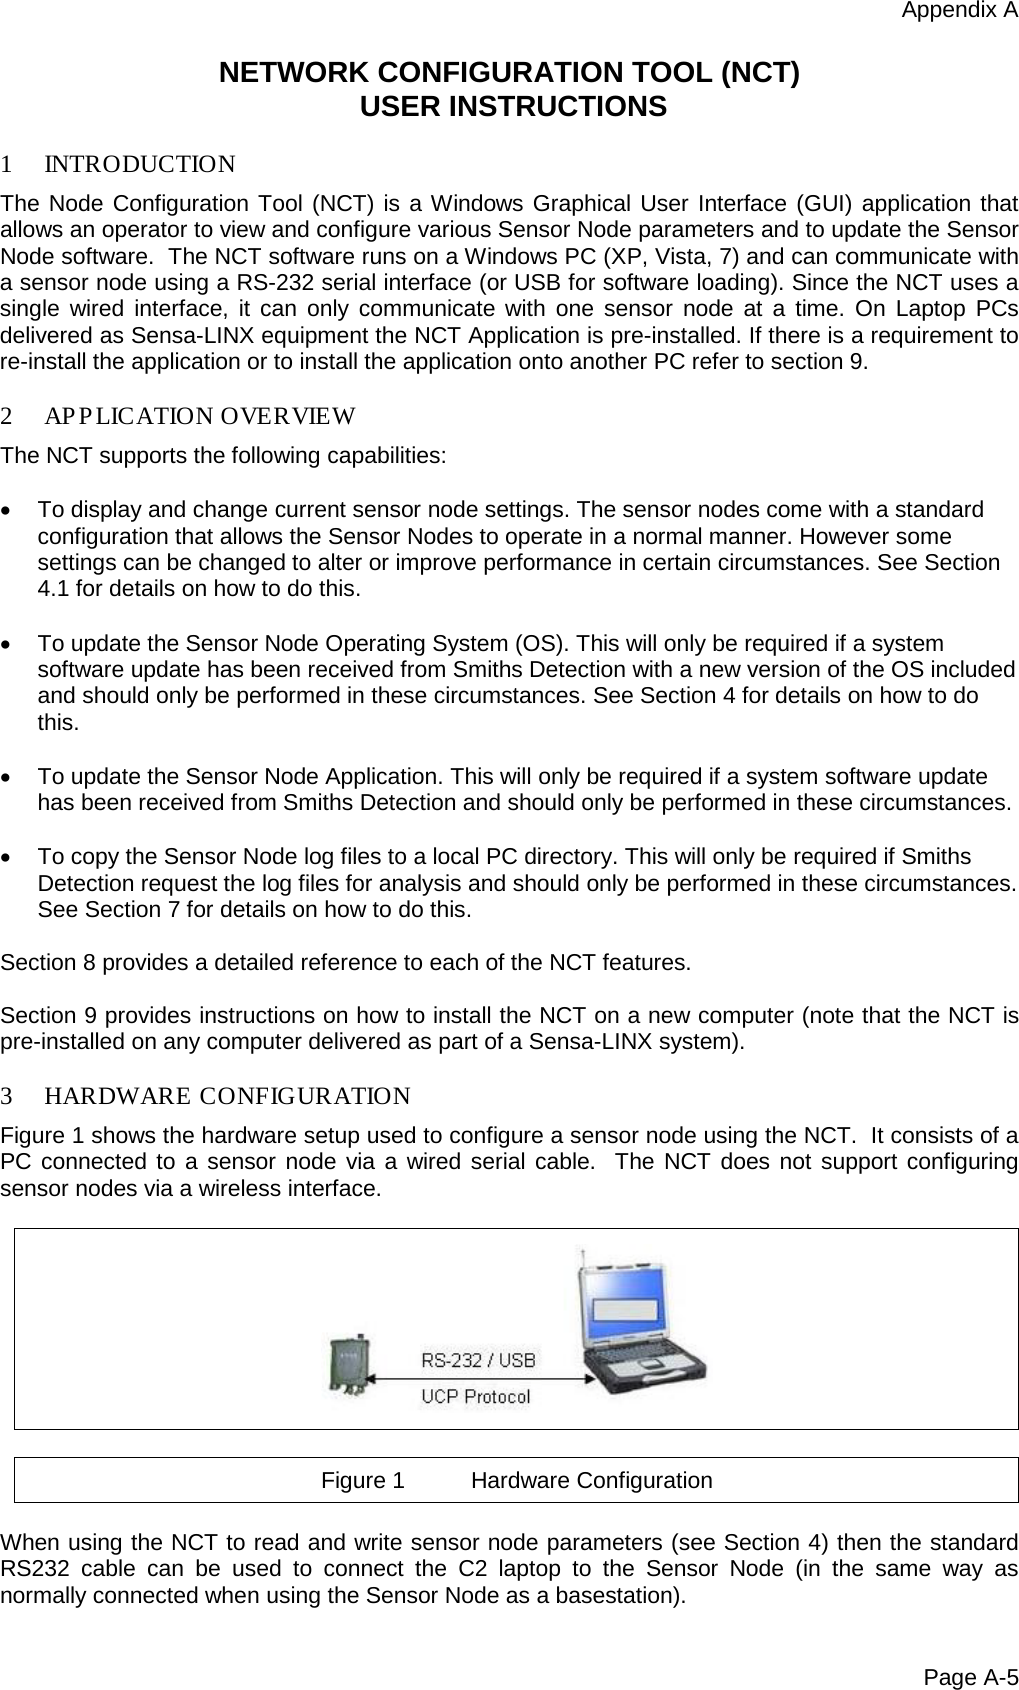 Appendix A Page A-5 NETWORK CONFIGURATION TOOL (NCT)  USER INSTRUCTIONS  1 INTRODUCTION The Node Configuration Tool (NCT) is a Windows Graphical User Interface (GUI) application that allows an operator to view and configure various Sensor Node parameters and to update the Sensor Node software.  The NCT software runs on a Windows PC (XP, Vista, 7) and can communicate with a sensor node using a RS-232 serial interface (or USB for software loading). Since the NCT uses a single wired interface, it can only communicate with one sensor node at a time. On Laptop PCs delivered as Sensa-LINX equipment the NCT Application is pre-installed. If there is a requirement to re-install the application or to install the application onto another PC refer to section 9.  2 AP PLICATION OVERVIEW The NCT supports the following capabilities:  •  To display and change current sensor node settings. The sensor nodes come with a standard configuration that allows the Sensor Nodes to operate in a normal manner. However some settings can be changed to alter or improve performance in certain circumstances. See Section 4.1 for details on how to do this.  • To update the Sensor Node Operating System (OS). This will only be required if a system software update has been received from Smiths Detection with a new version of the OS included and should only be performed in these circumstances. See Section 4 for details on how to do this.   • To update the Sensor Node Application. This will only be required if a system software update has been received from Smiths Detection and should only be performed in these circumstances.   • To copy the Sensor Node log files to a local PC directory. This will only be required if Smiths Detection request the log files for analysis and should only be performed in these circumstances. See Section 7 for details on how to do this.  Section 8 provides a detailed reference to each of the NCT features.  Section 9 provides instructions on how to install the NCT on a new computer (note that the NCT is pre-installed on any computer delivered as part of a Sensa-LINX system).  3 HARDWARE CONFIGURATION Figure 1 shows the hardware setup used to configure a sensor node using the NCT.  It consists of a PC connected to a sensor node via a wired serial cable.  The NCT does not support configuring sensor nodes via a wireless interface.    Figure 1 Hardware Configuration  When using the NCT to read and write sensor node parameters (see Section 4) then the standard RS232 cable can be used to connect the C2 laptop to the Sensor Node (in the same way as normally connected when using the Sensor Node as a basestation). 